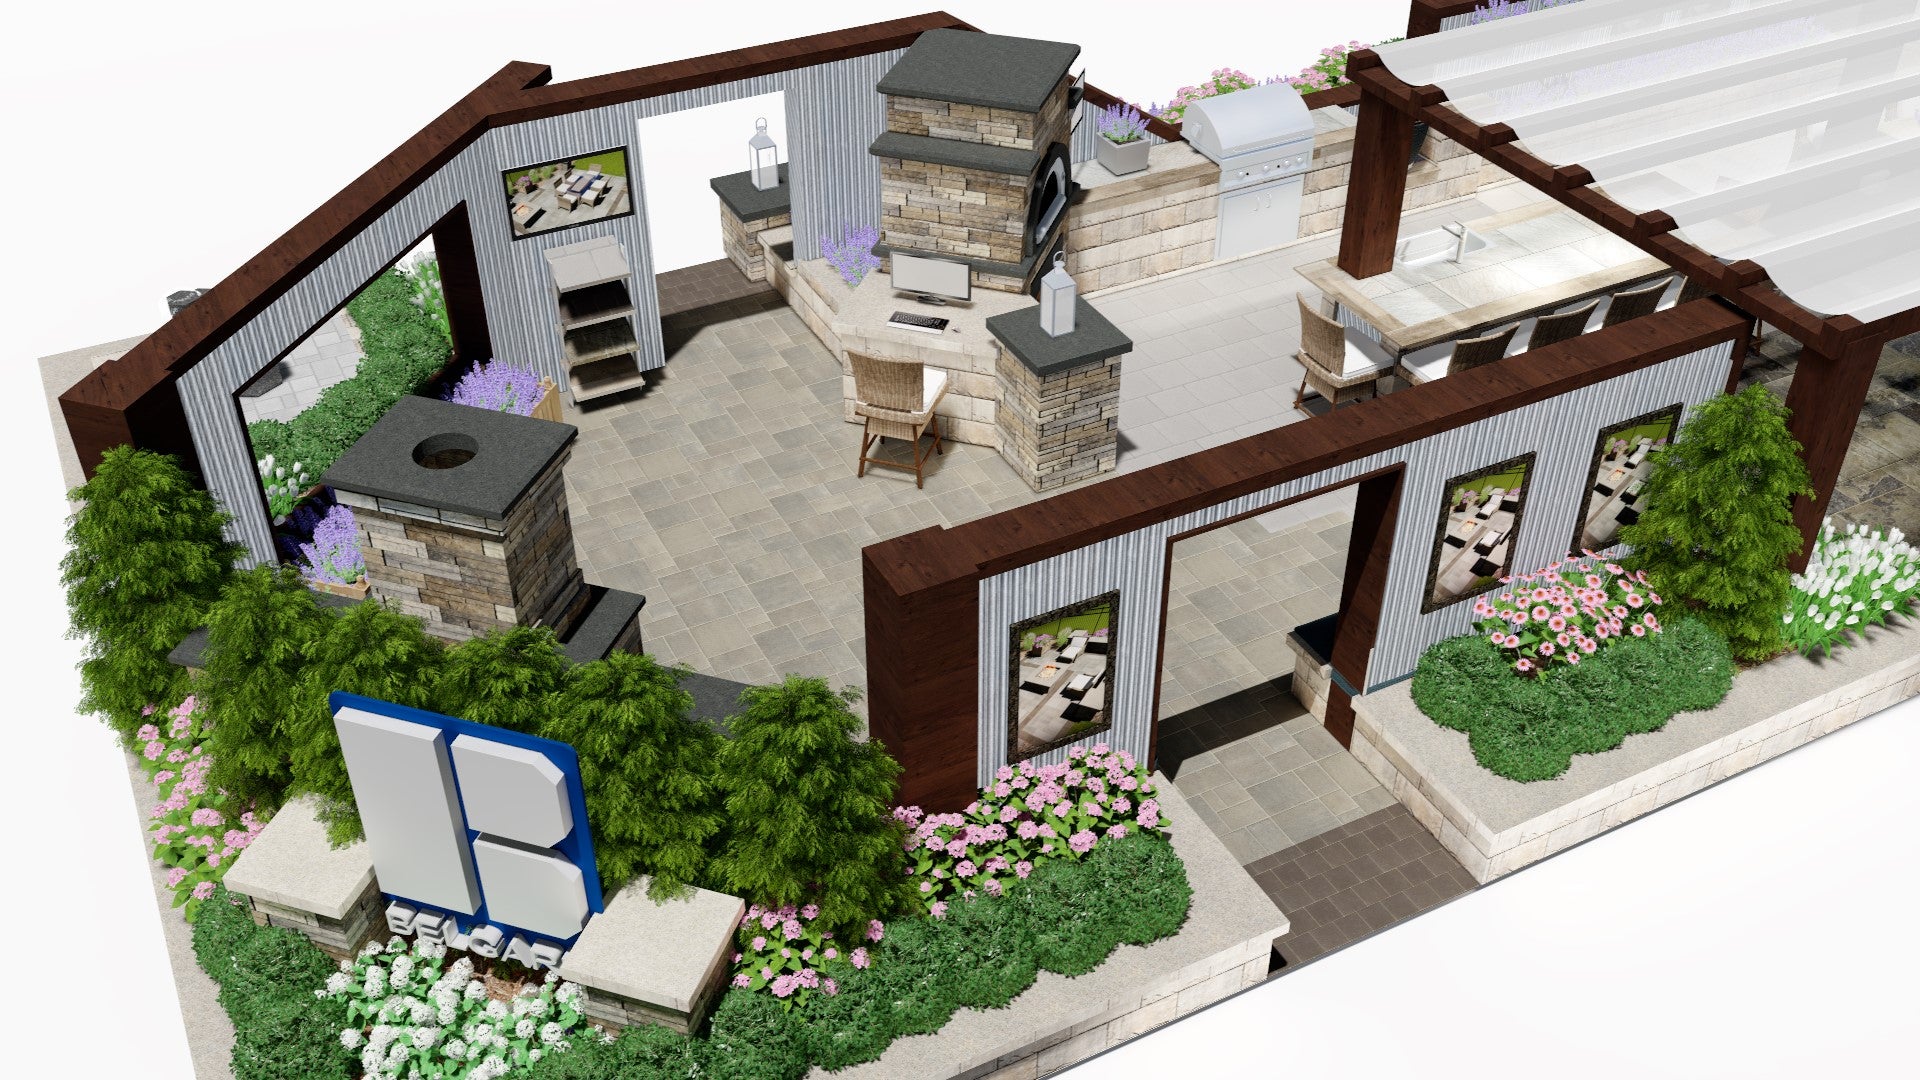 Sneak peek into the outdoor living room and kitchen that will be constructed in Belgard's expansive display.